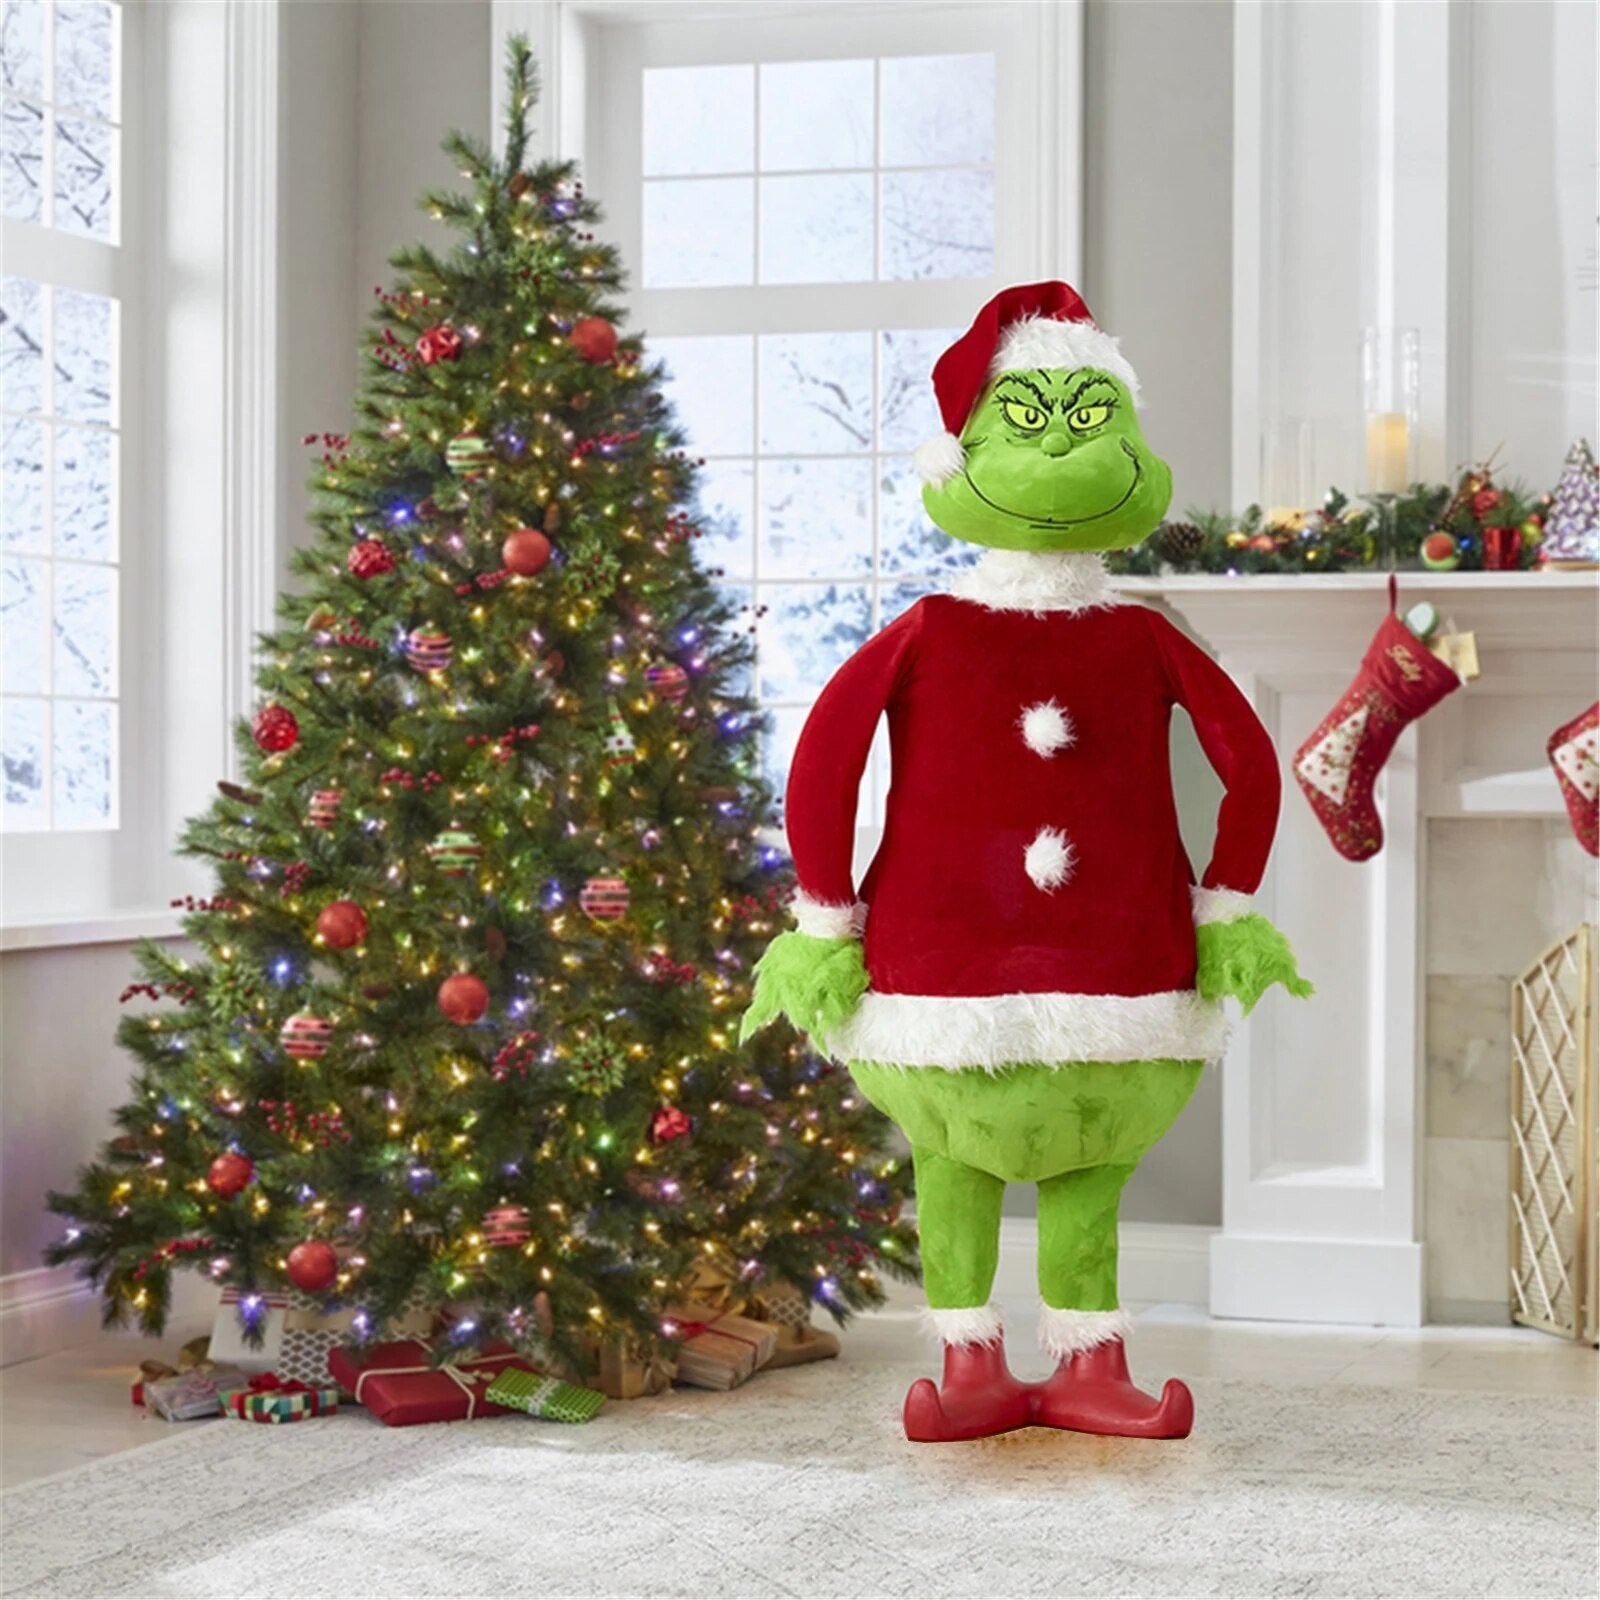 https://trabyhand.com/wp-content/uploads/2022/07/2022-New-Year-Christmas-Tree-Decorations-Furry-Lovely-Green-Grinch-Elf-Arm-Ornament-Holder-Home-Party_65894b1f-b17a-4d66-ad4f-e3cbc14c49db.jpg